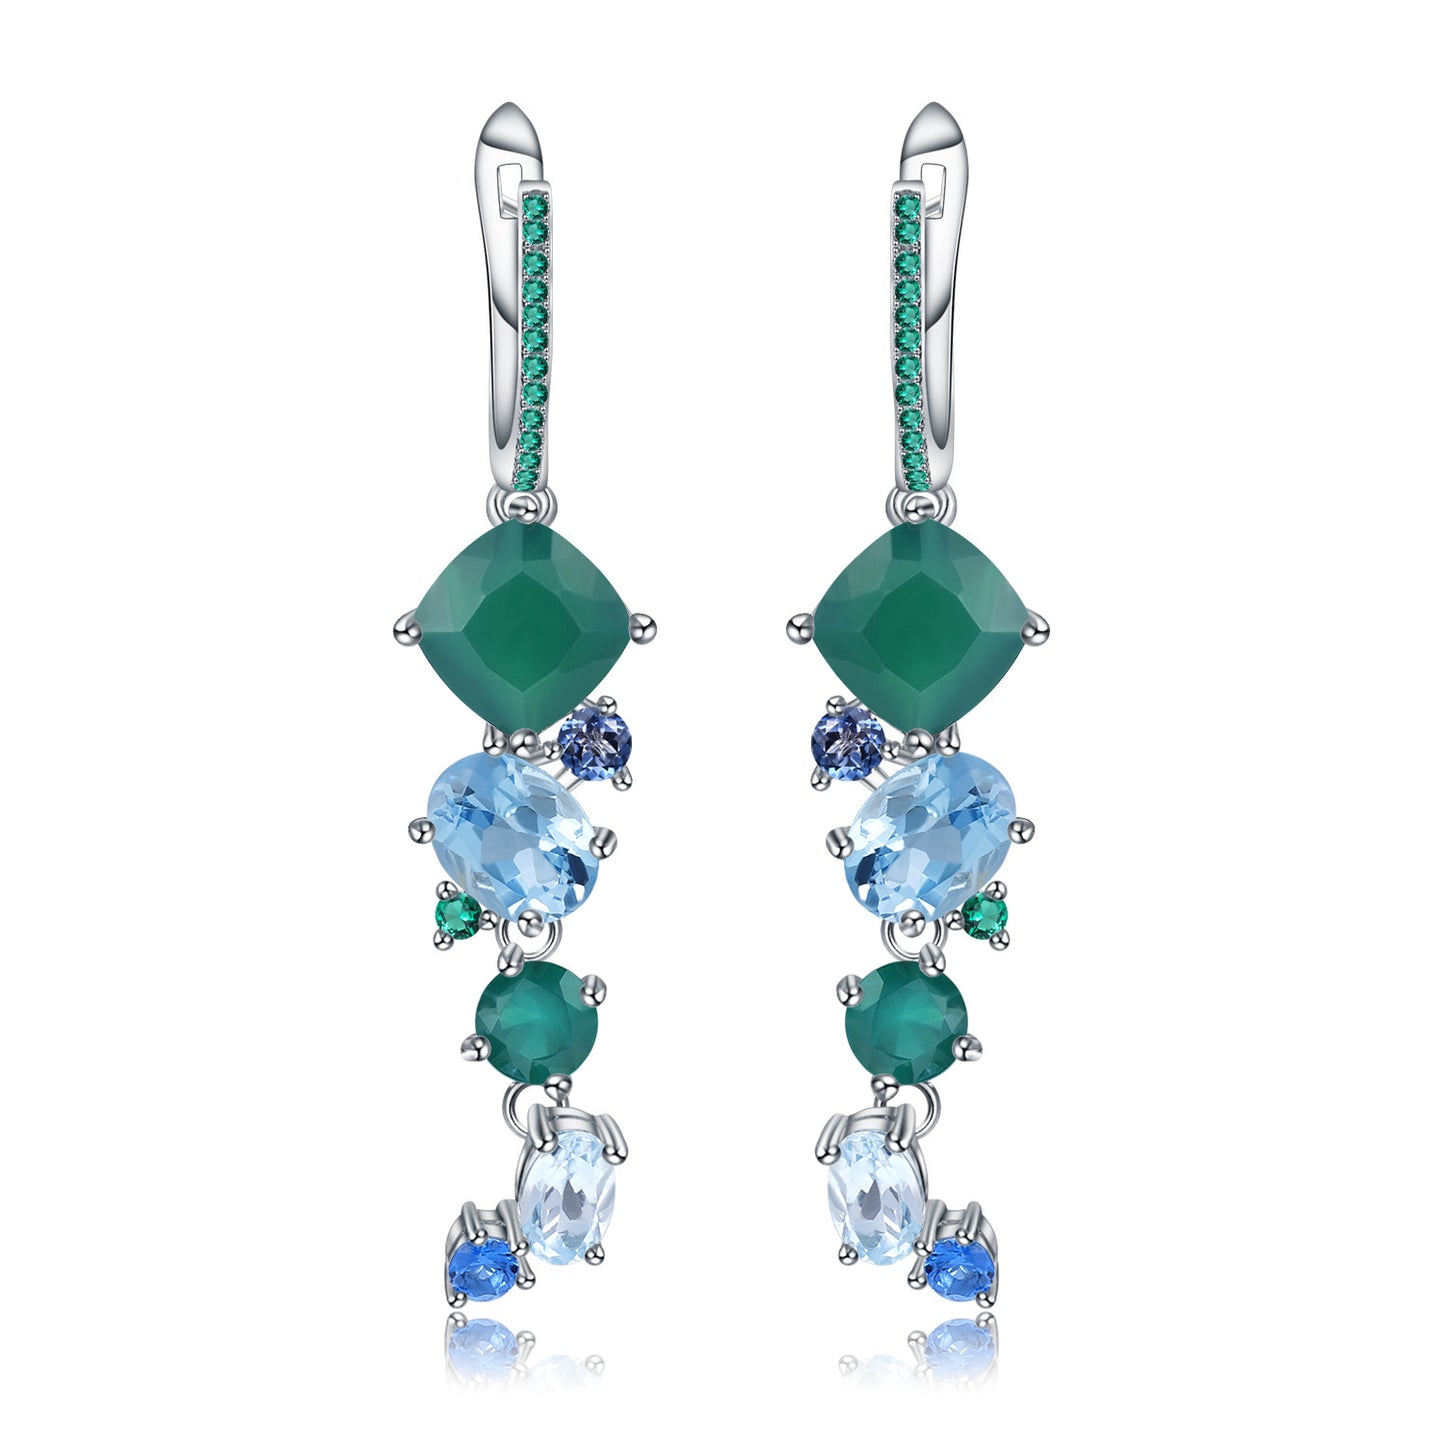 Luxury Design for Banquet Inlaid Natural Colourful Gemstone Beading Silver Drop Earrings for Women